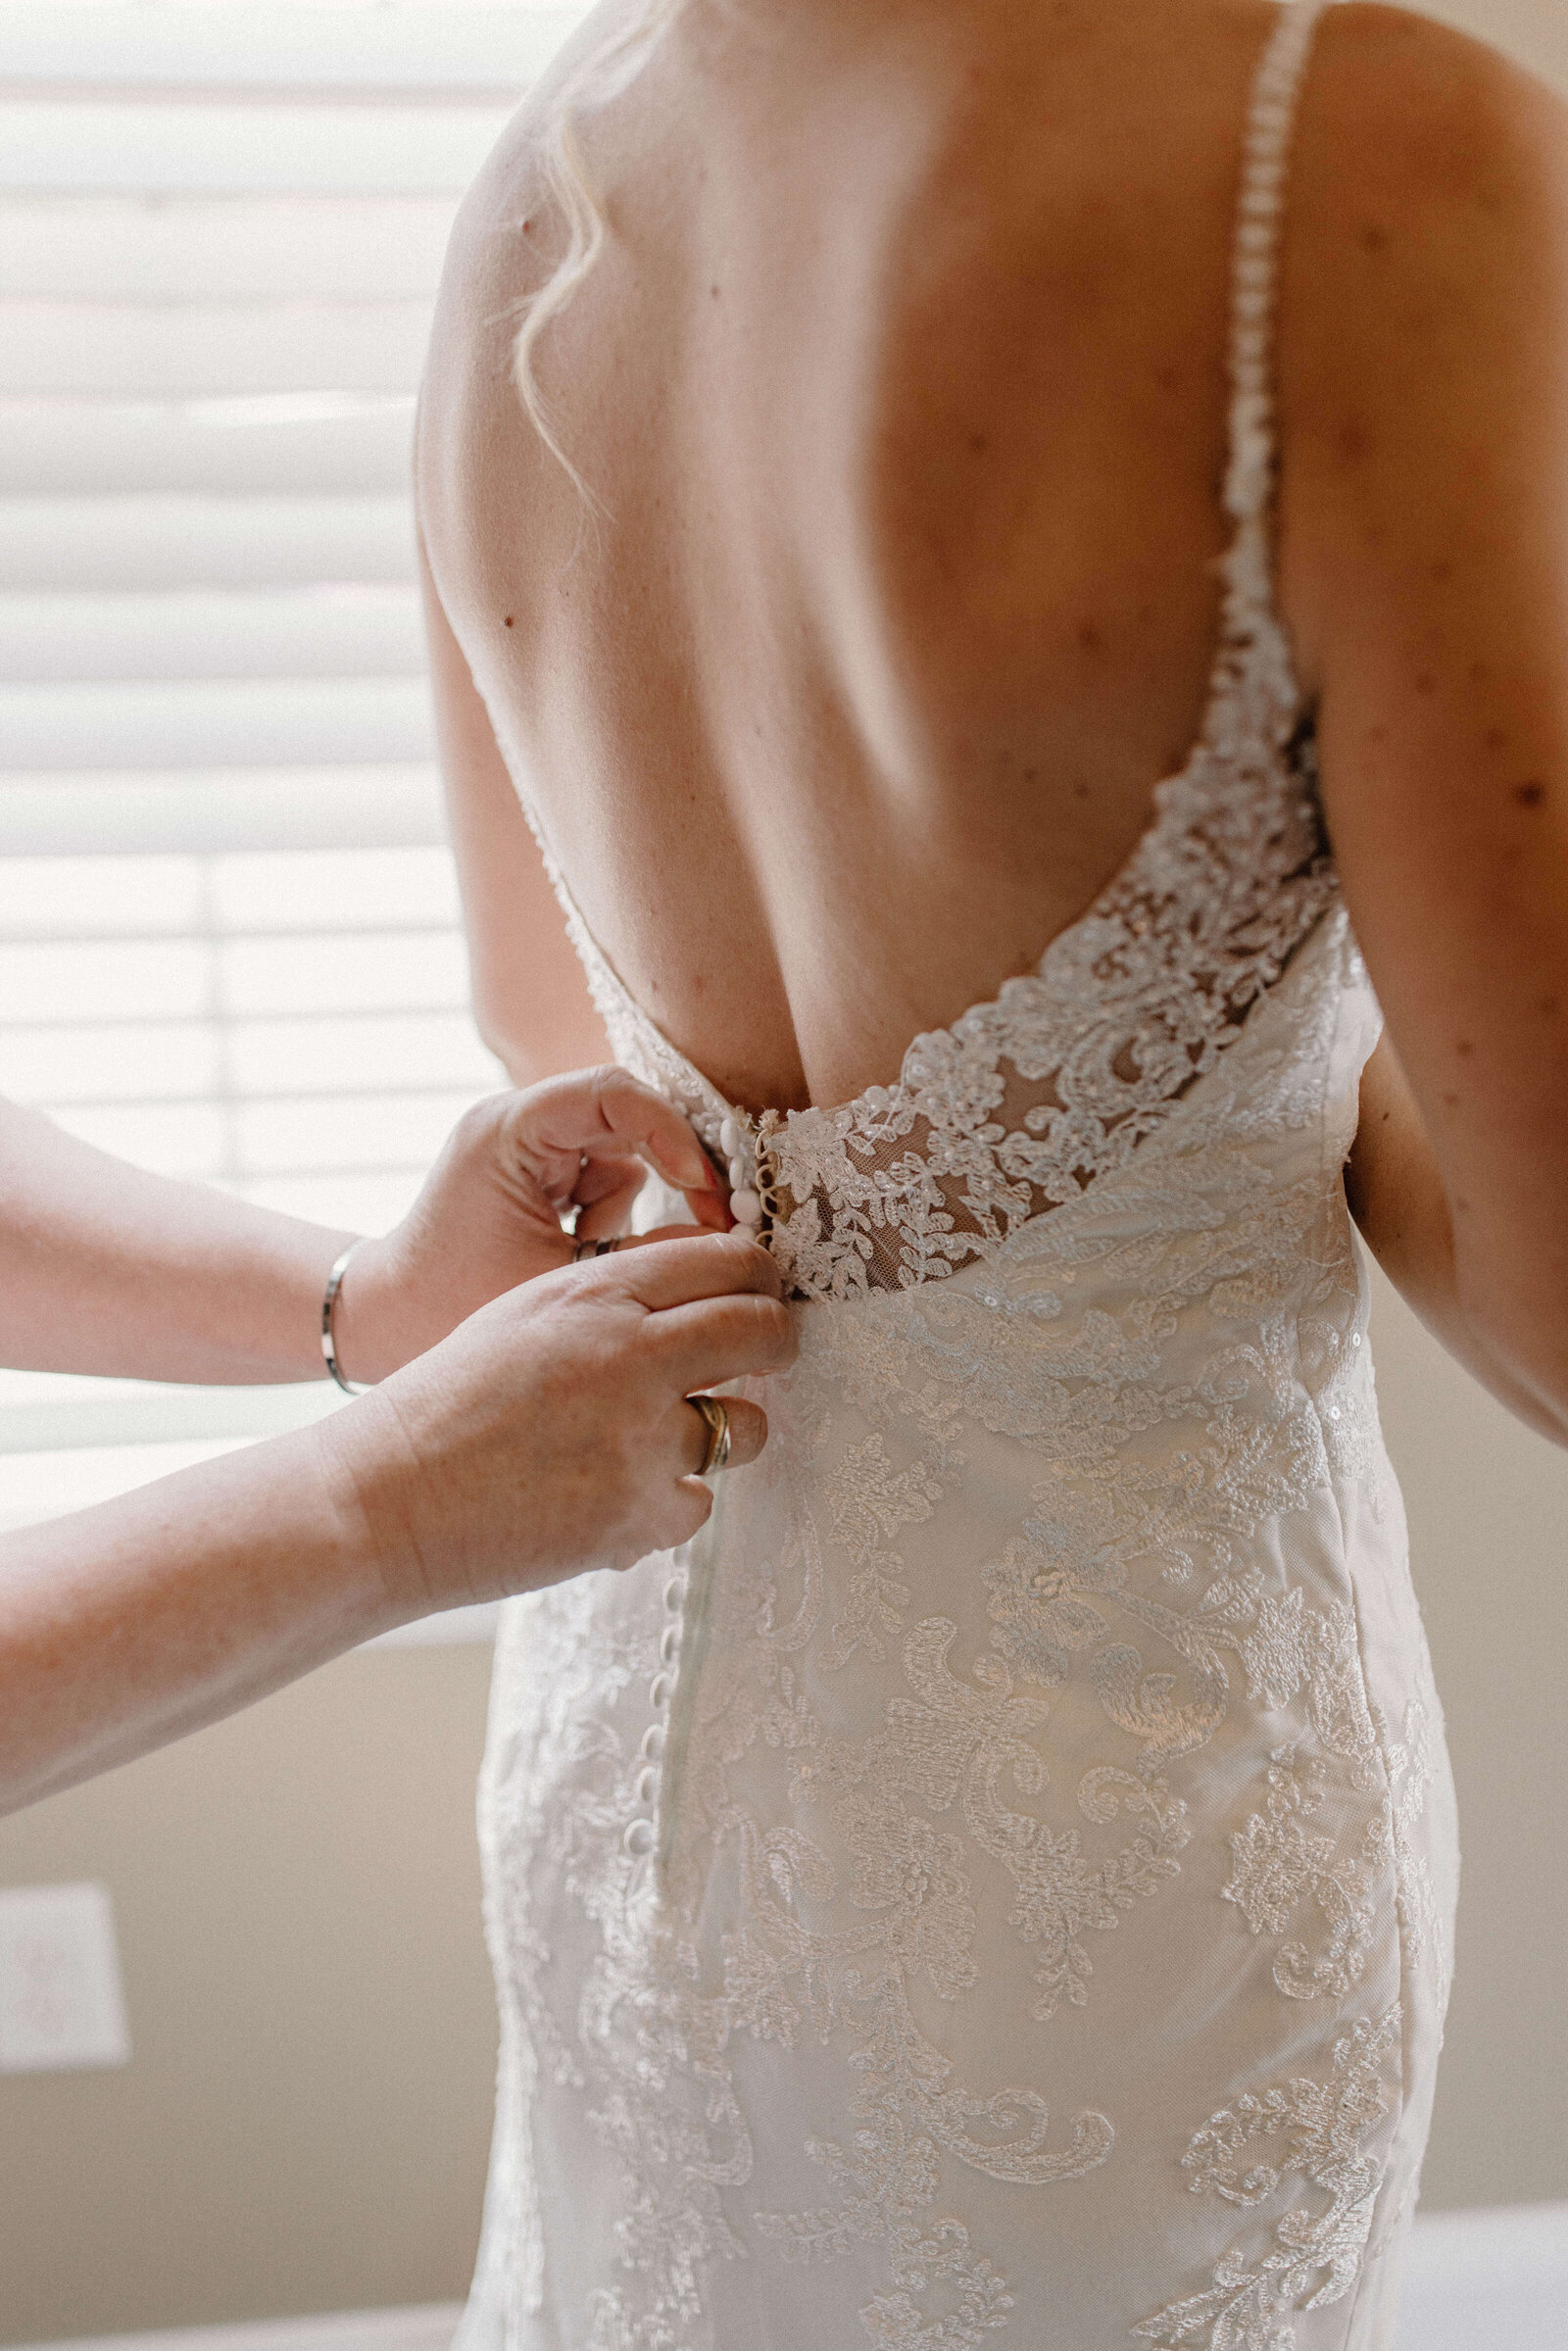 MOH buttoning up brides dress in getting ready suite by delaware wedding photographer sabrina leigh